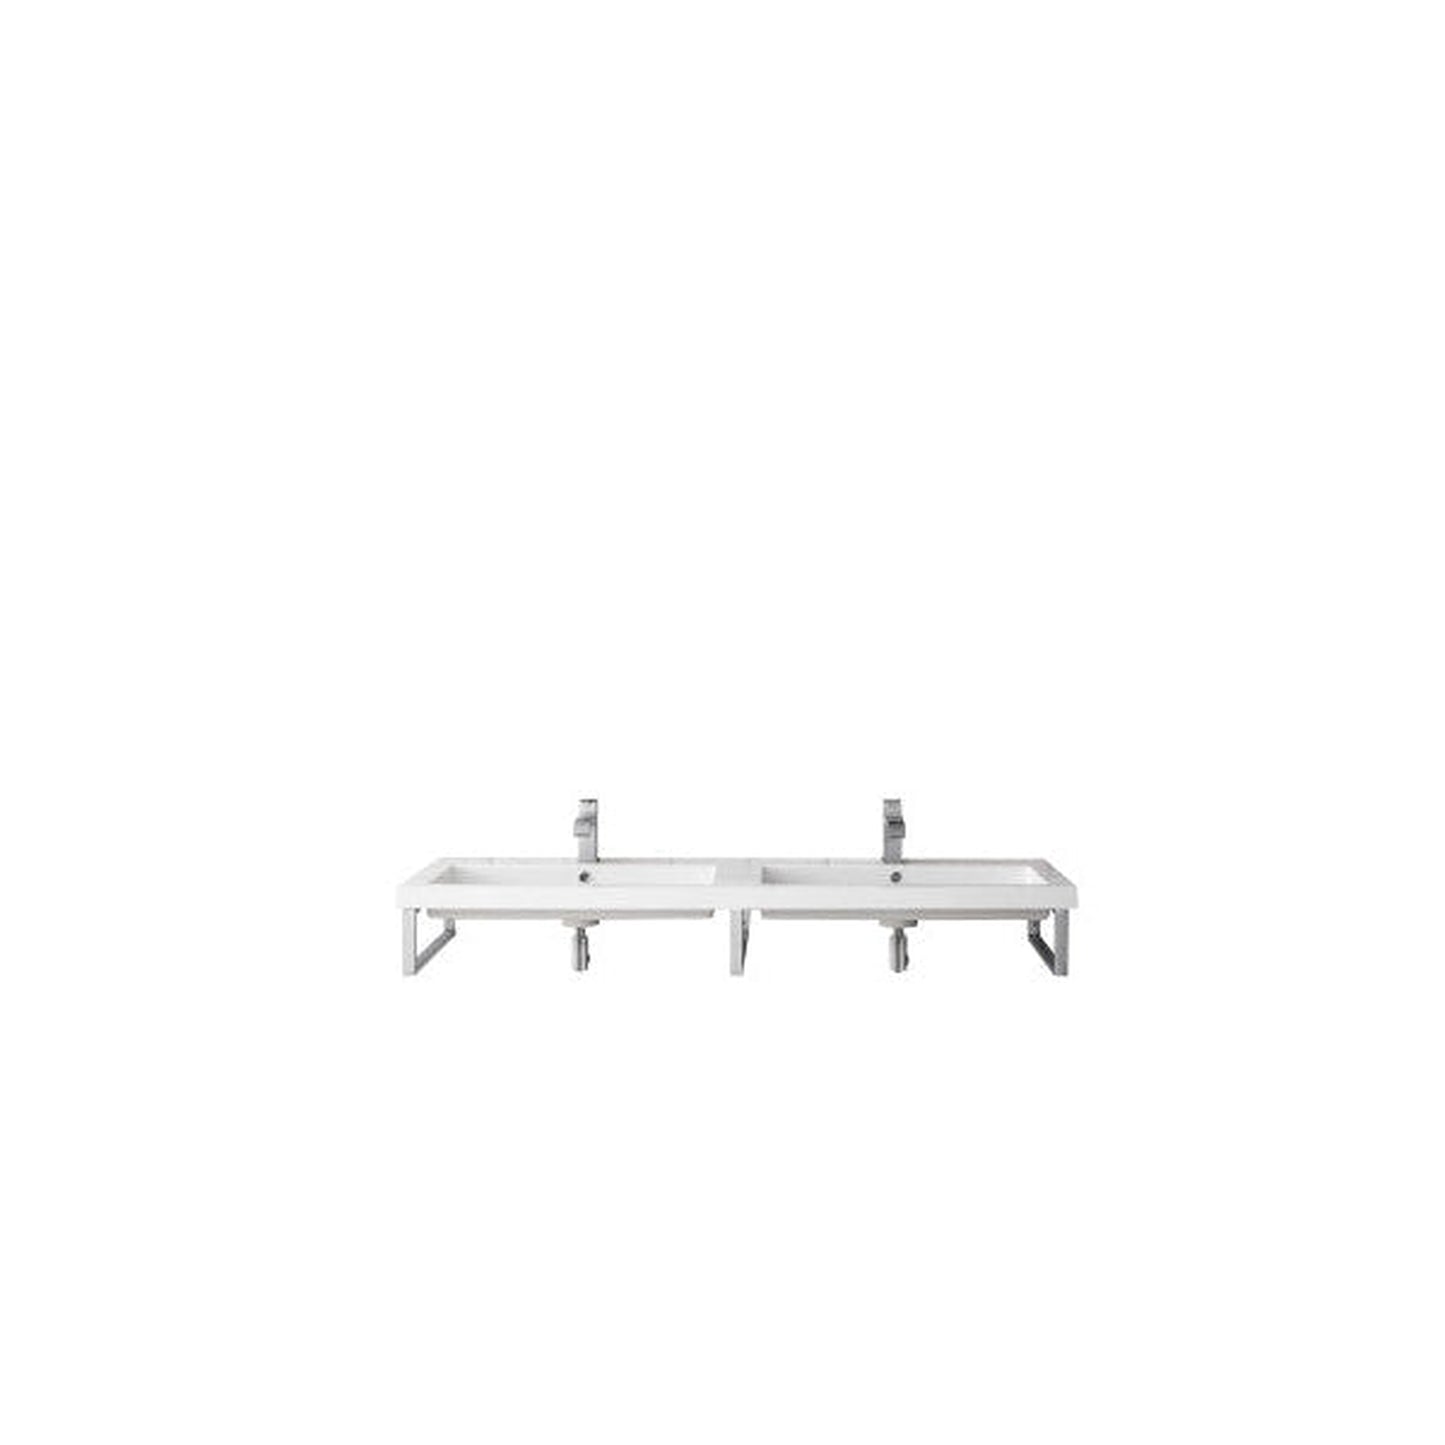 James Martin Boston 18" Three Brushed Nickel Stainless Steel Wall Bracket With 63" White Glossy Composite Countertop